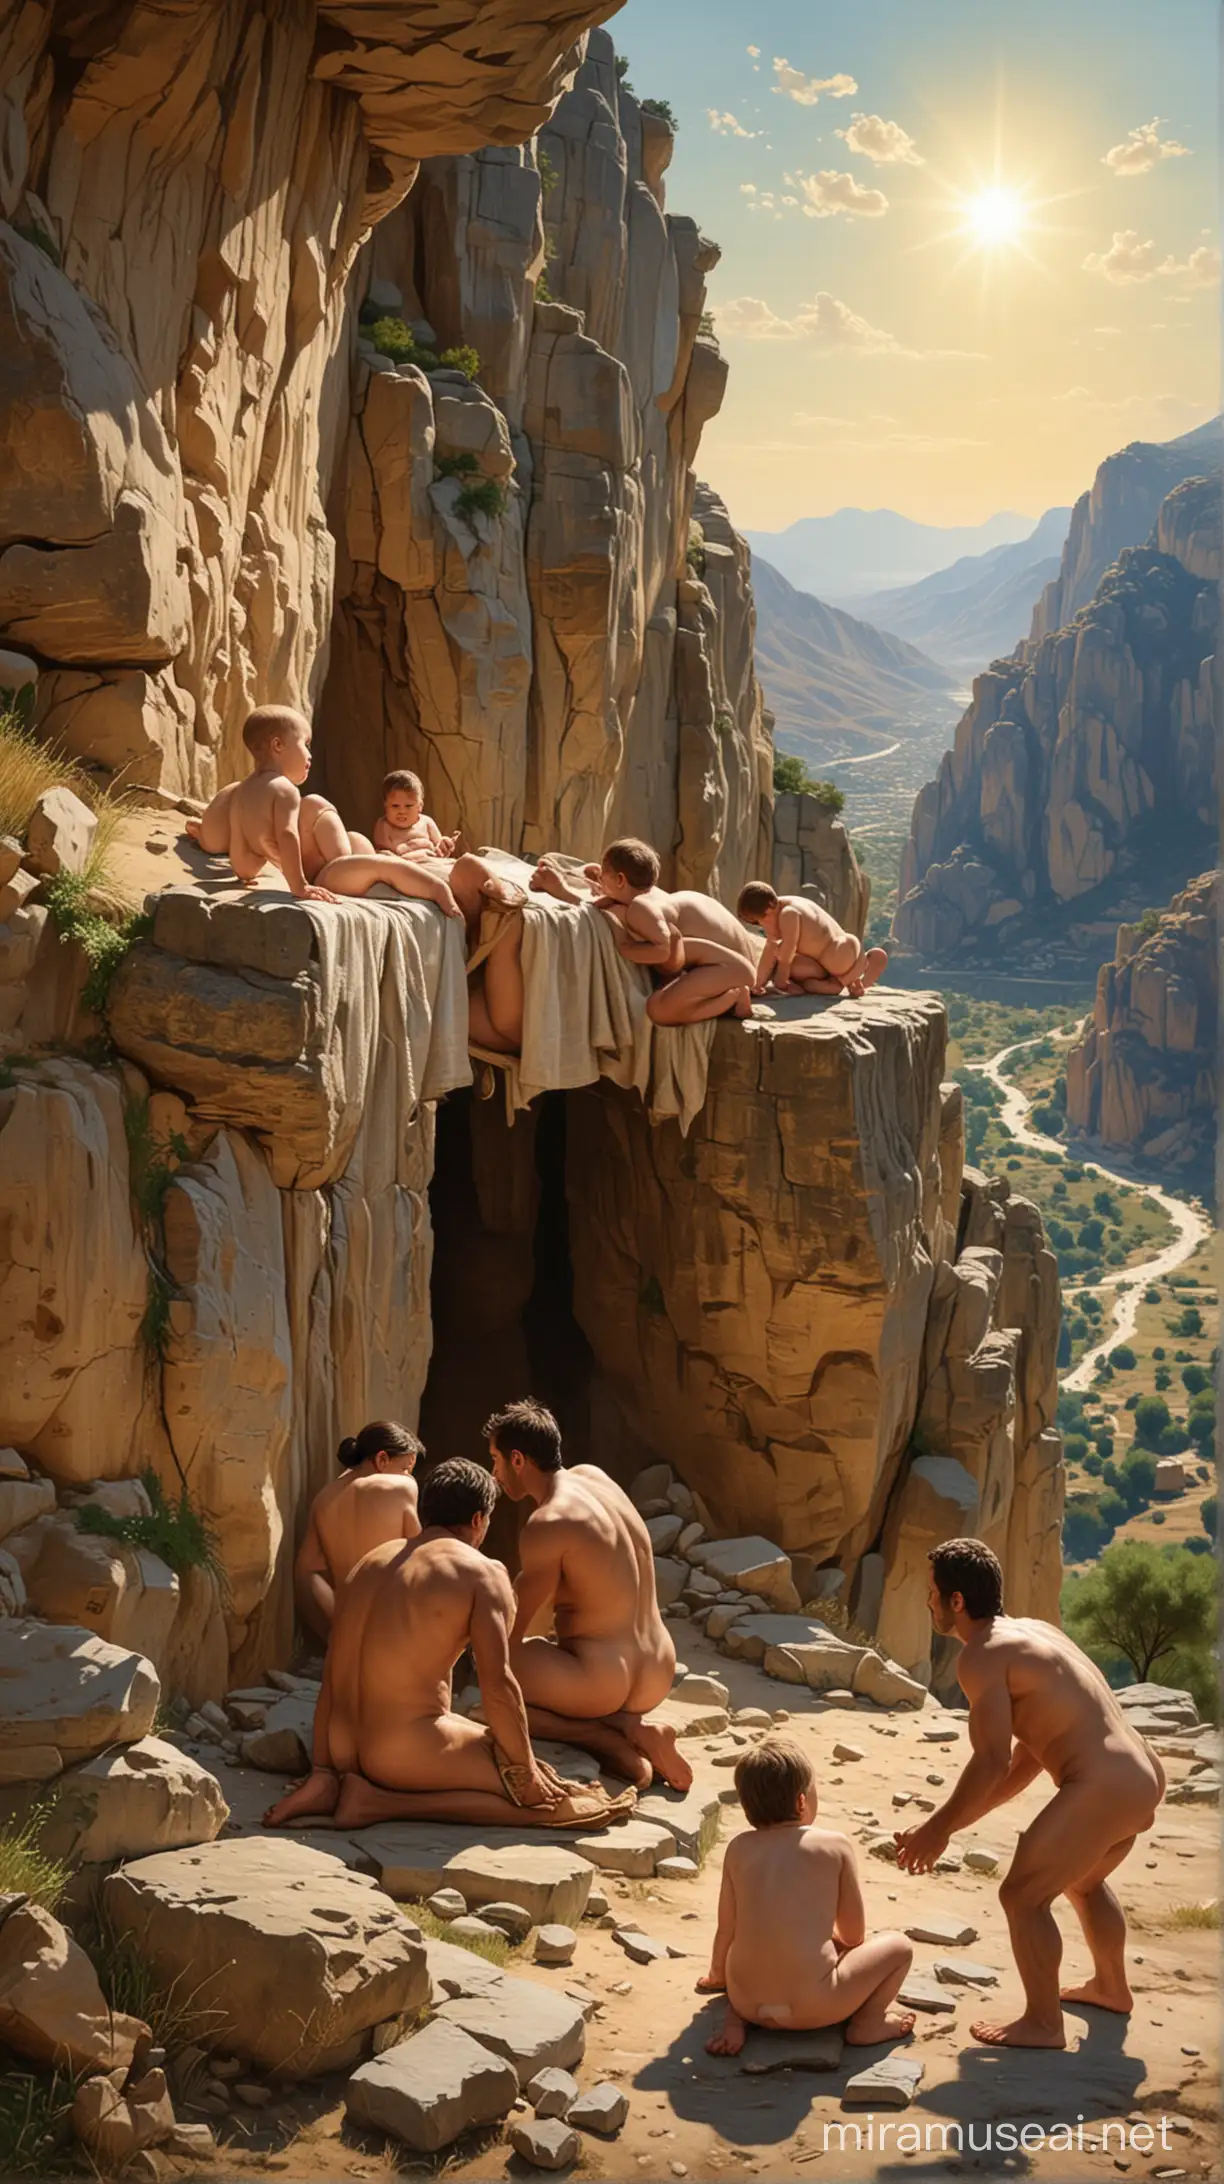 In ancient Sparta, a scene where a baby is being examined is quite dramatic. A group of Spartans gathers under the sun, carefully inspecting the baby while standing at the edge of a cliff overlooking a high hill. The naked body of the baby is placed on a wooden table to be examined. The Spartans have serious and focused expressions as they meticulously check the baby's body for any signs of weakness or deformity. There may be debates among them; some believe the baby is healthy while others are searching for potential signs of weakness or deformity. The atmosphere of the scene is tense, and the view of the surrounding mountains and hills emphasizes the seriousness of the event.

